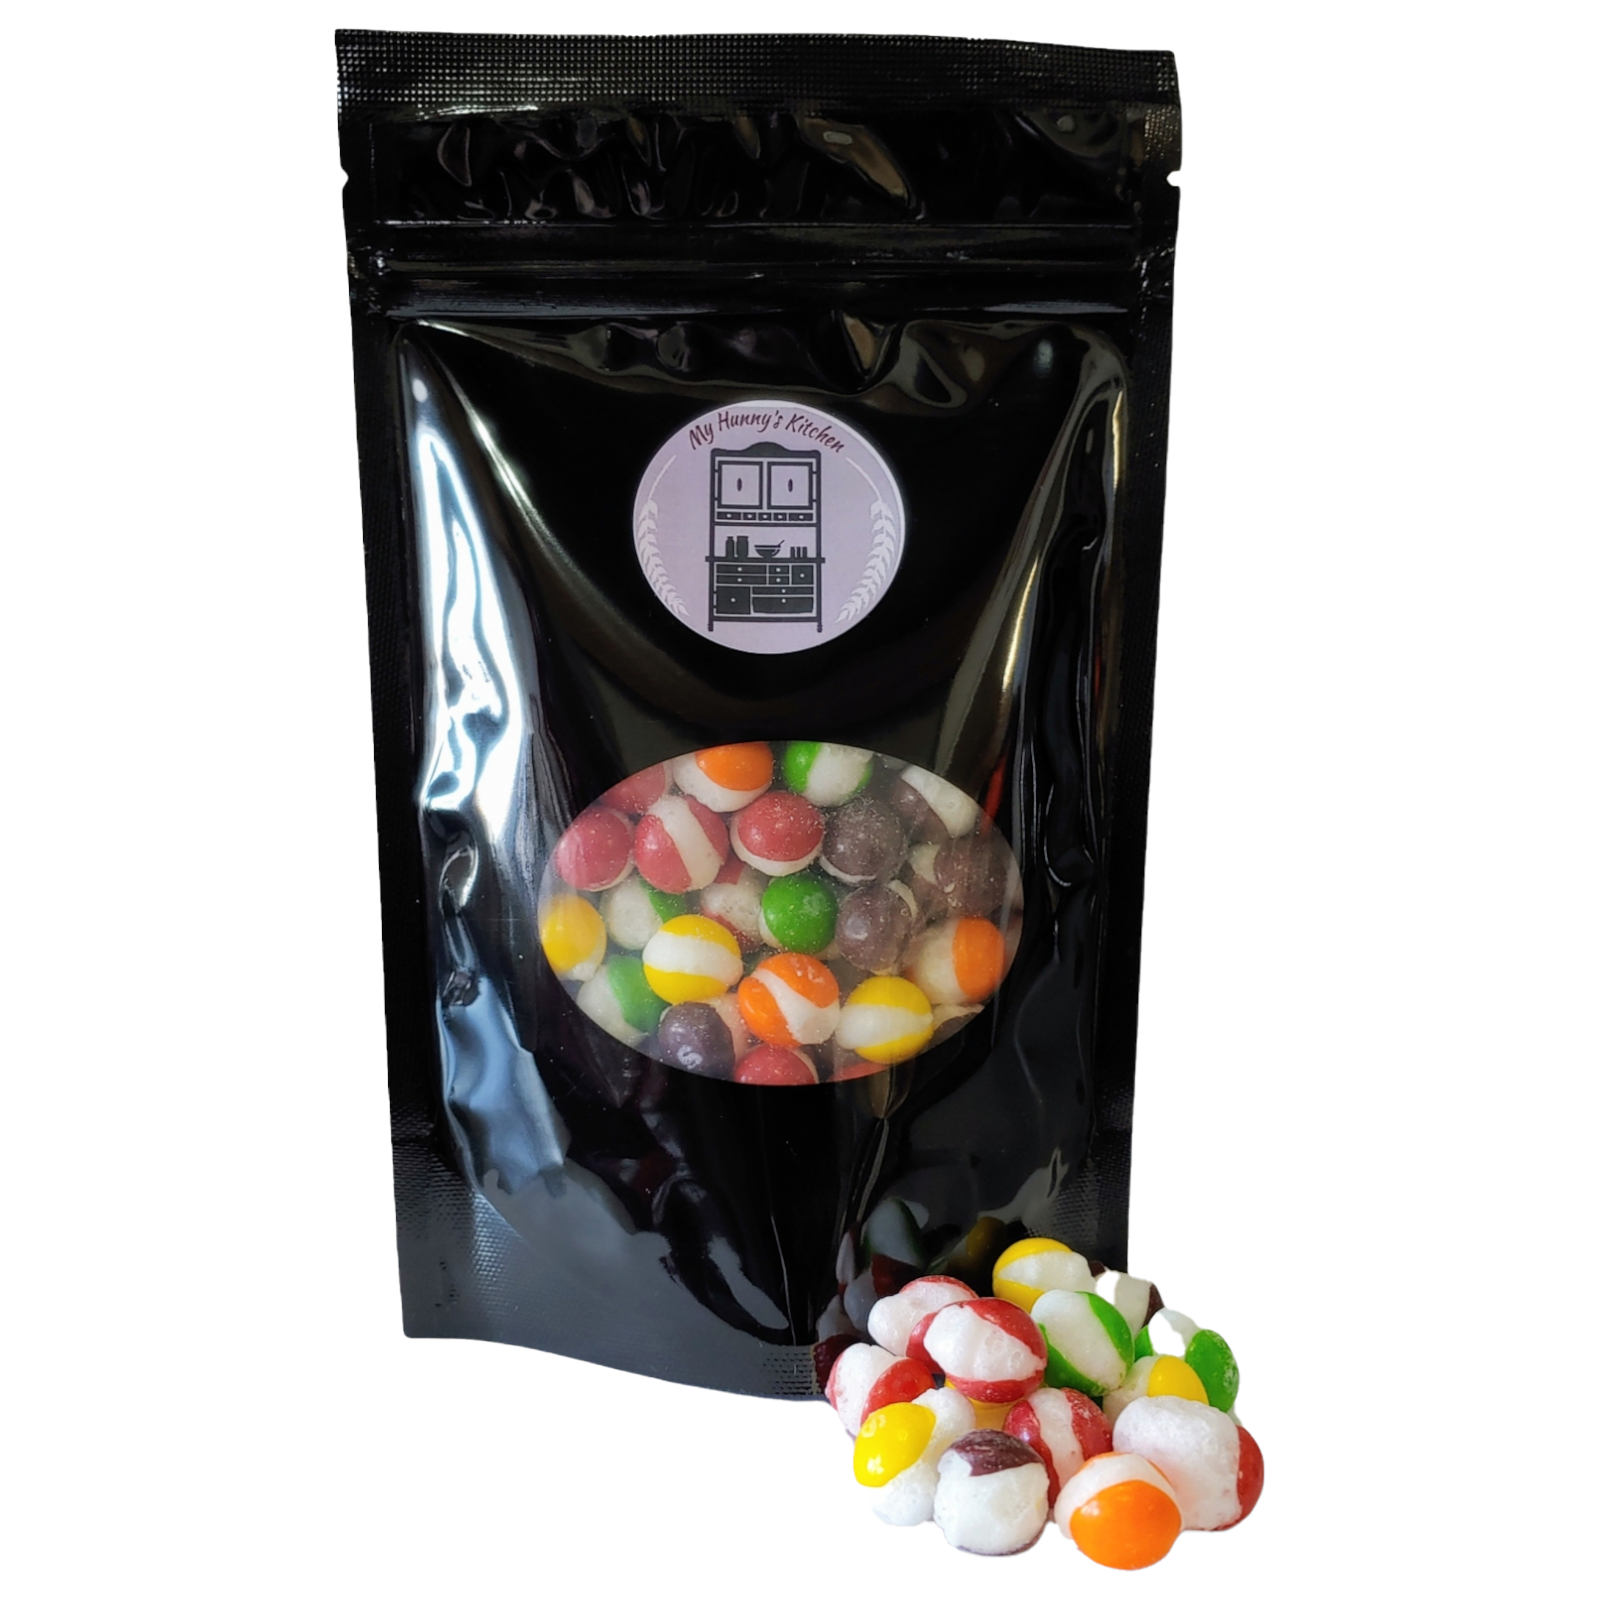 Frittles Freeze Dried Candy packaging front view